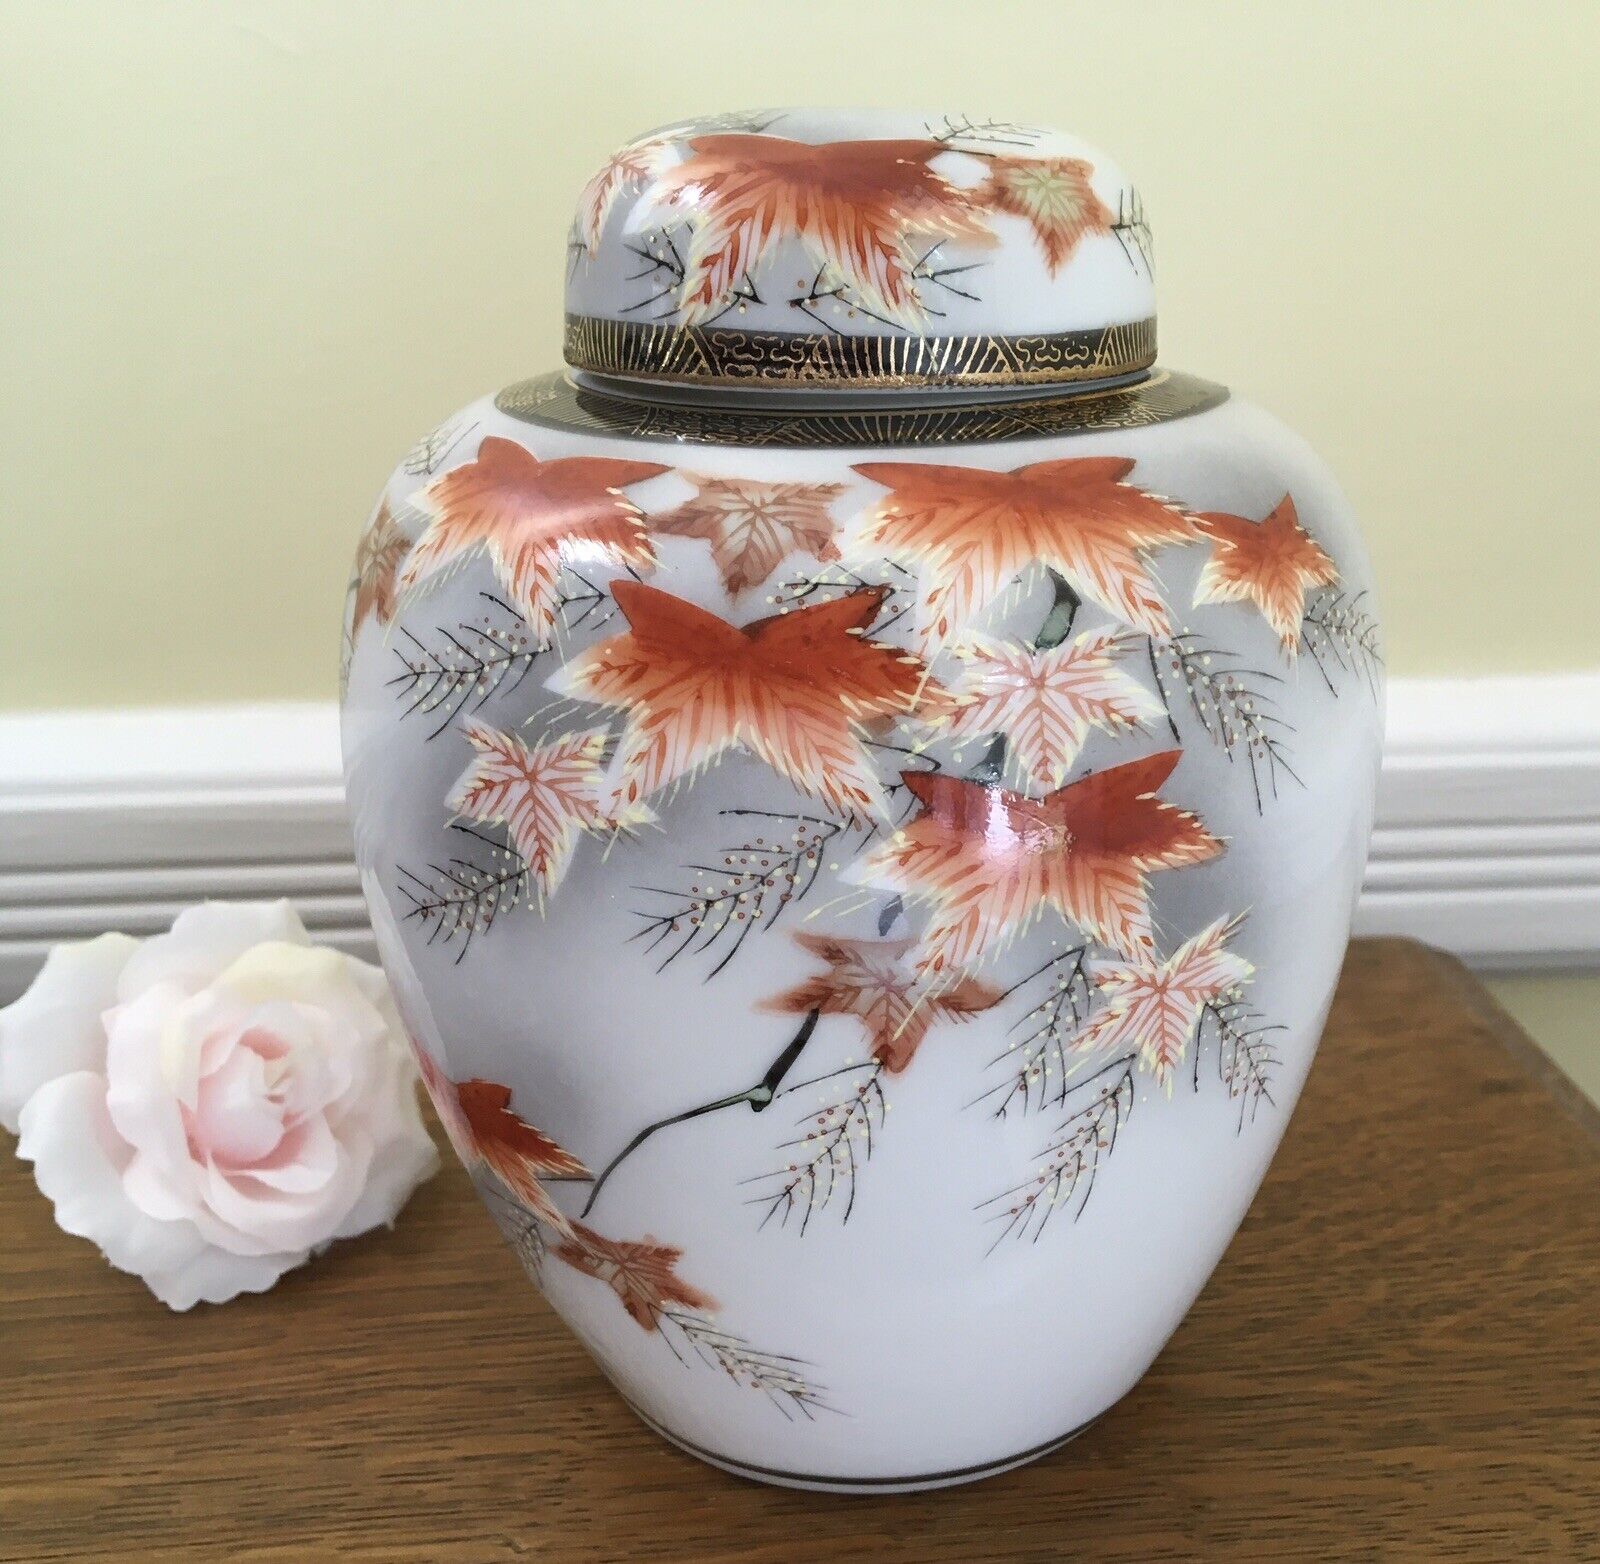 Beautiful Vintage Porcelain Ginger Jar by Toyo of Japan with Red Maple Leaves